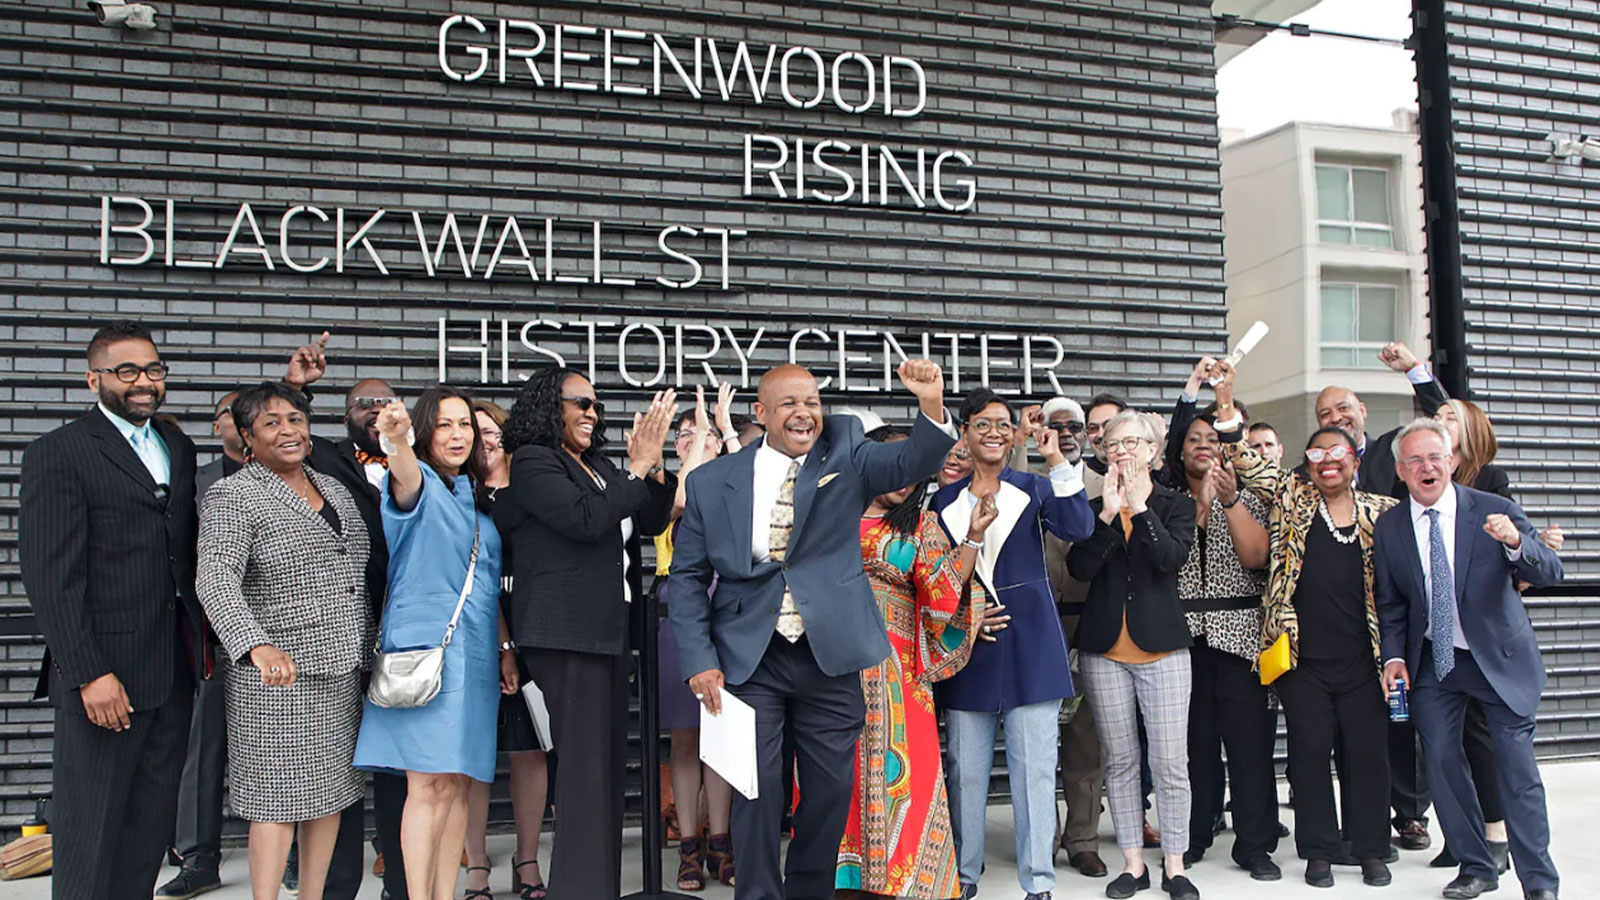 Members of the 1921 Tulsa Race Massacre Centennial Commission, with State Sen. Kevin Matthews in front, cheer in front of the Greenwood Rising Black Wall St. History Center before a dedication in June 2021 in Tulsa. (Mike Simons/Tulsa World/AP)Members of the 1921 Tulsa Race Massacre Centennial Commission, with State Sen. Kevin Matthews in front, cheer in front of the Greenwood Rising Black Wall St. History Center before a dedication in June 2021 in Tulsa.